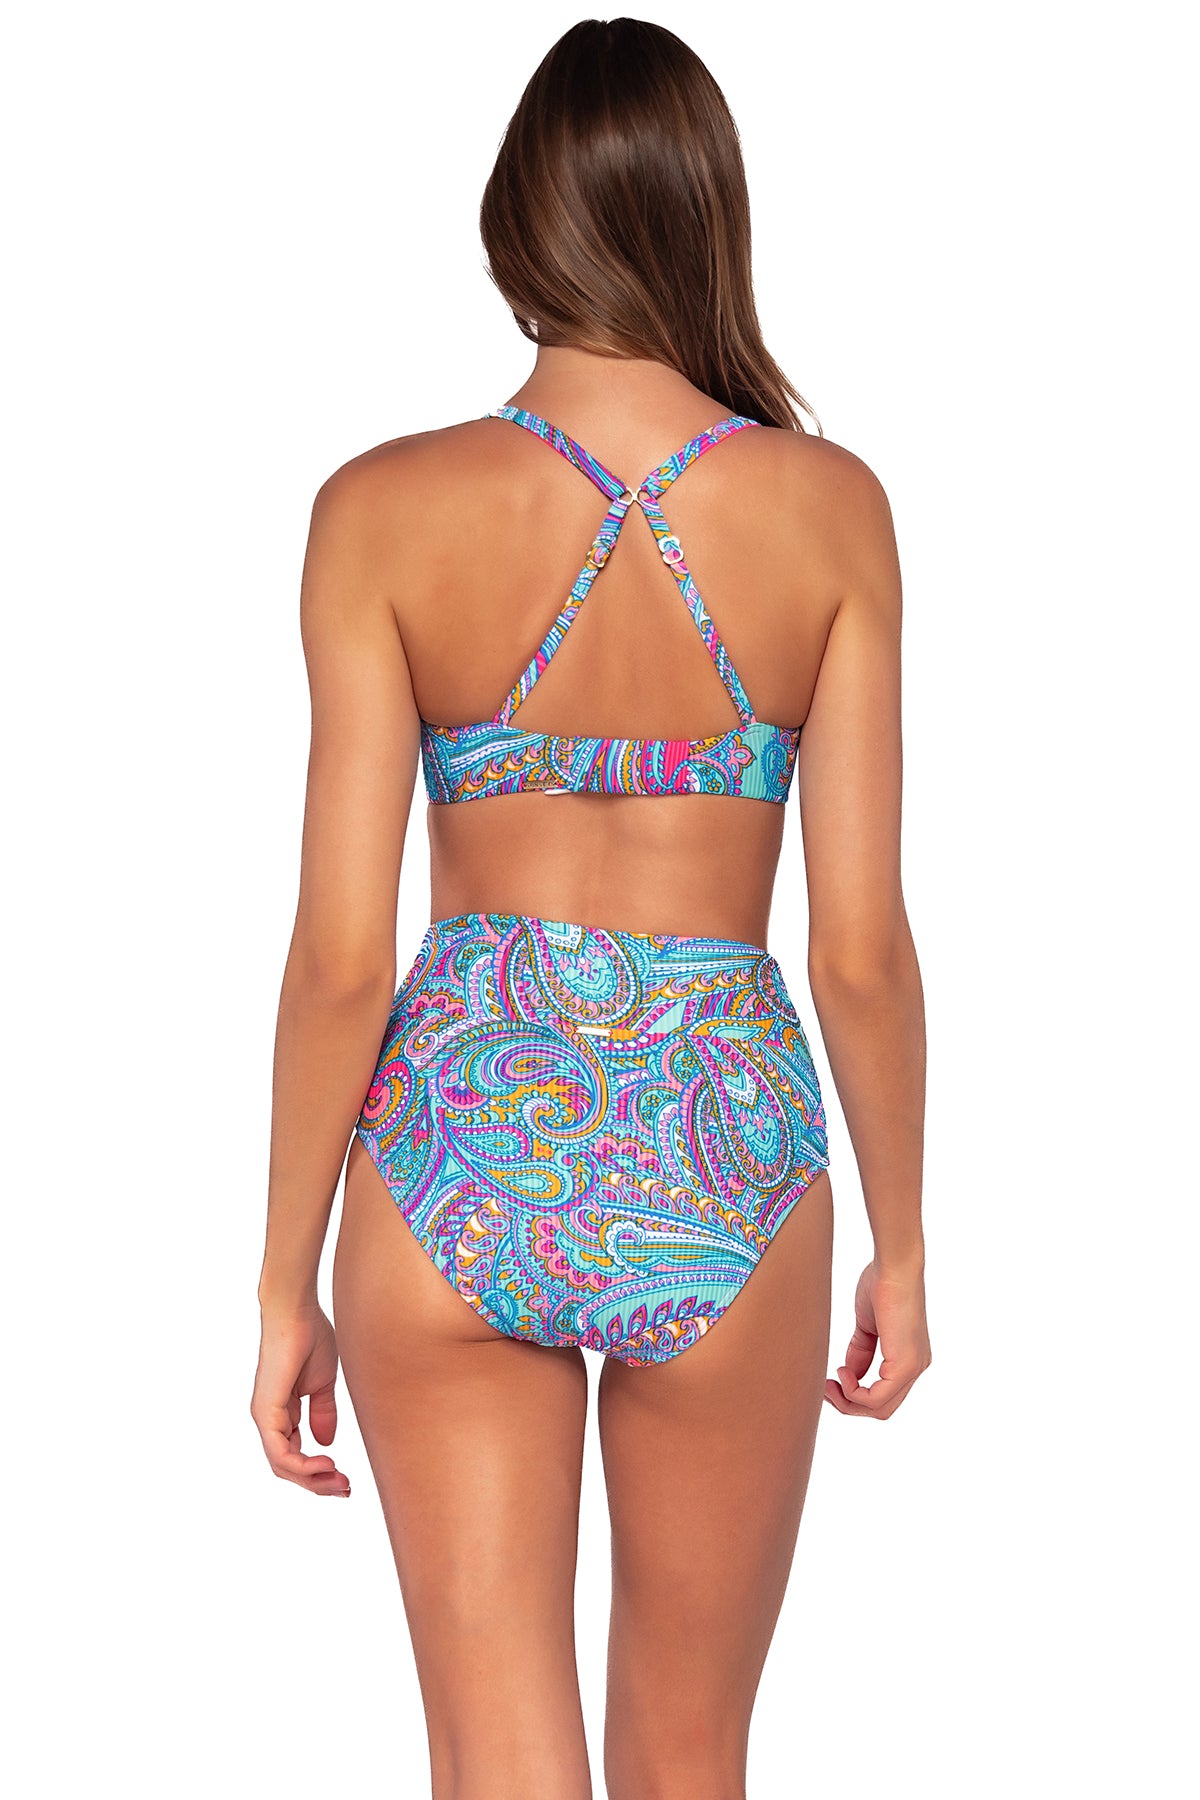 Back view of Sunsets Paisley Pop Hannah High Waist Bottom with matching Juliette Underwire bikini top showing crossback straps